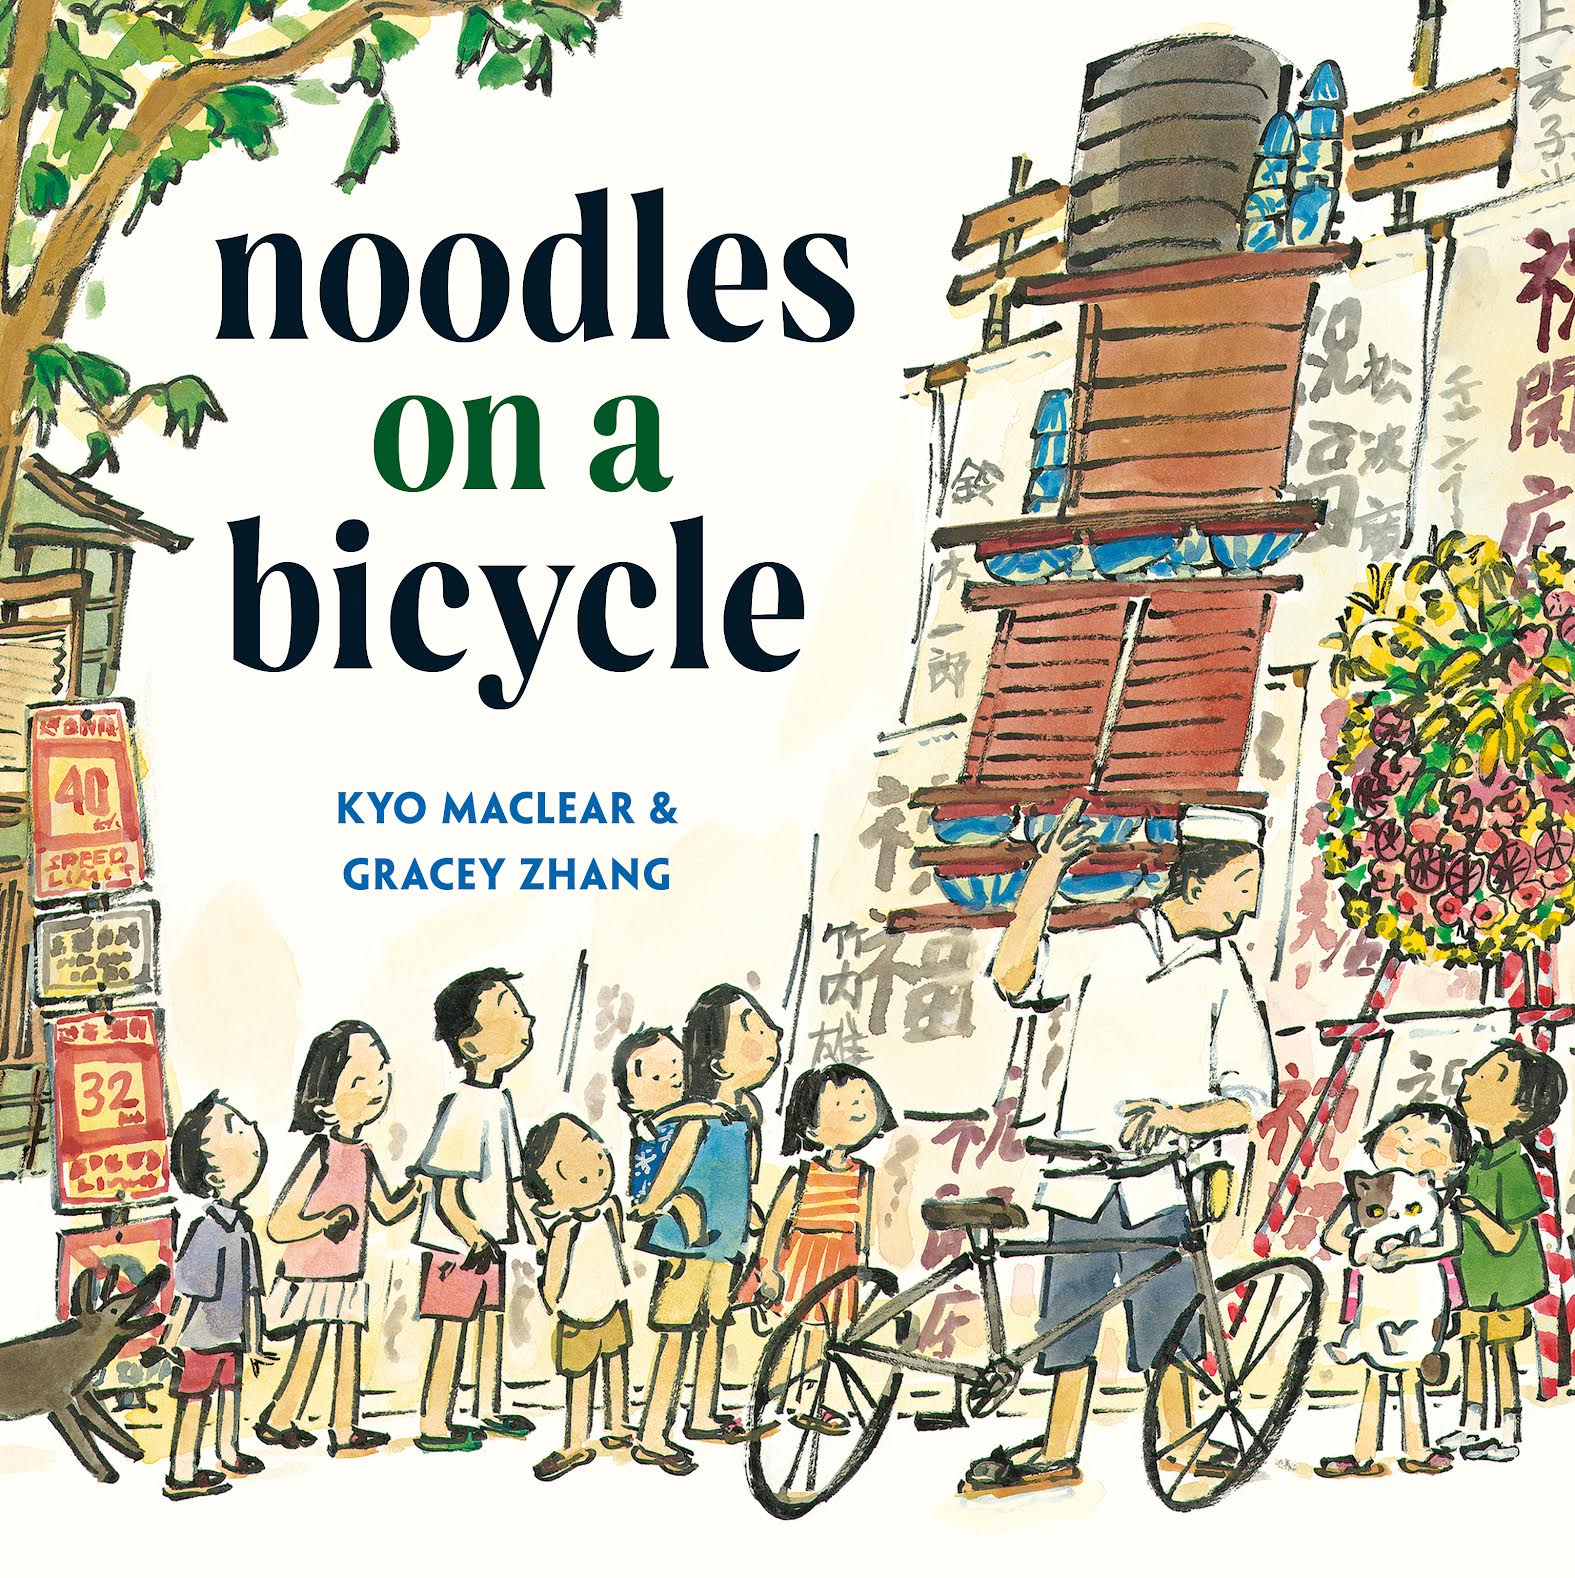 Noodles from Noodles from Noodles: A Q&A with Kyo Maclear and Gracey Zhang About Noodles on a Bicycle Interview